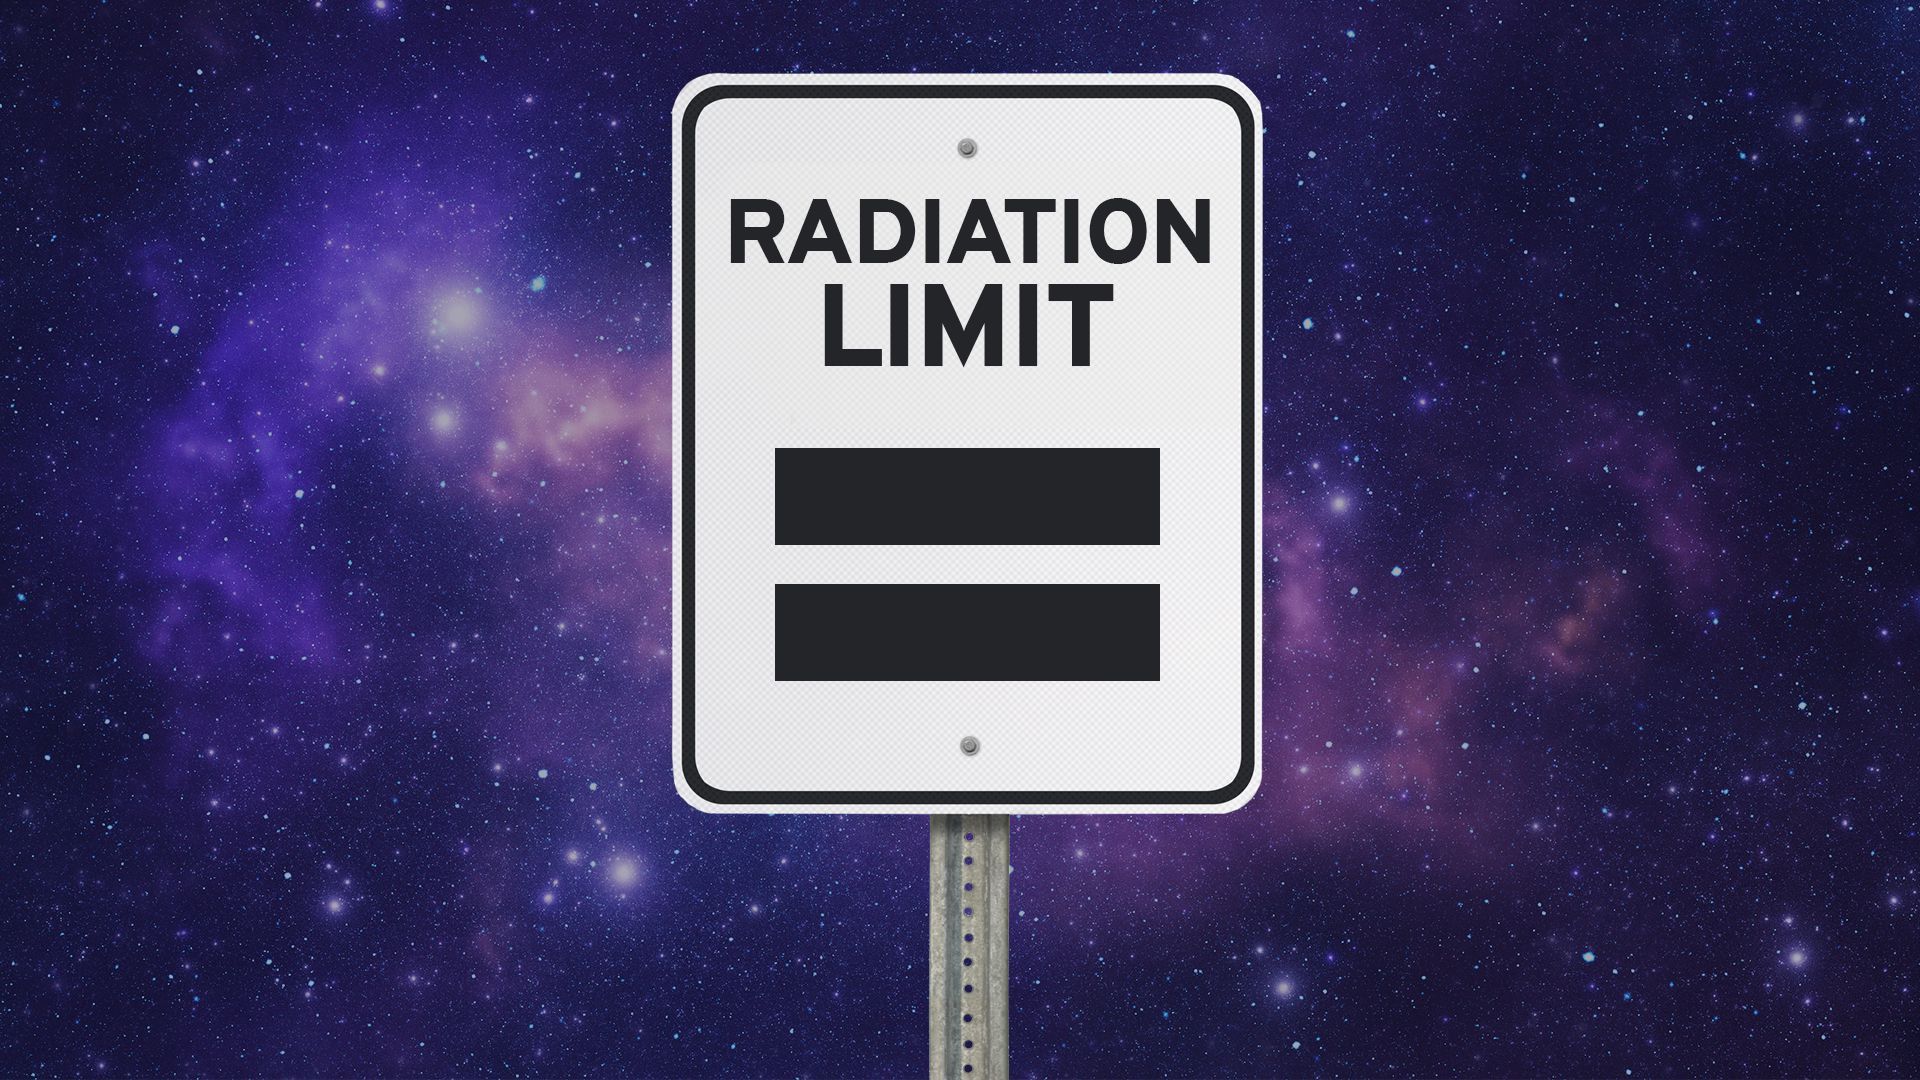 Illustration of a sign that says “Radiation Limit: =” in outer space.